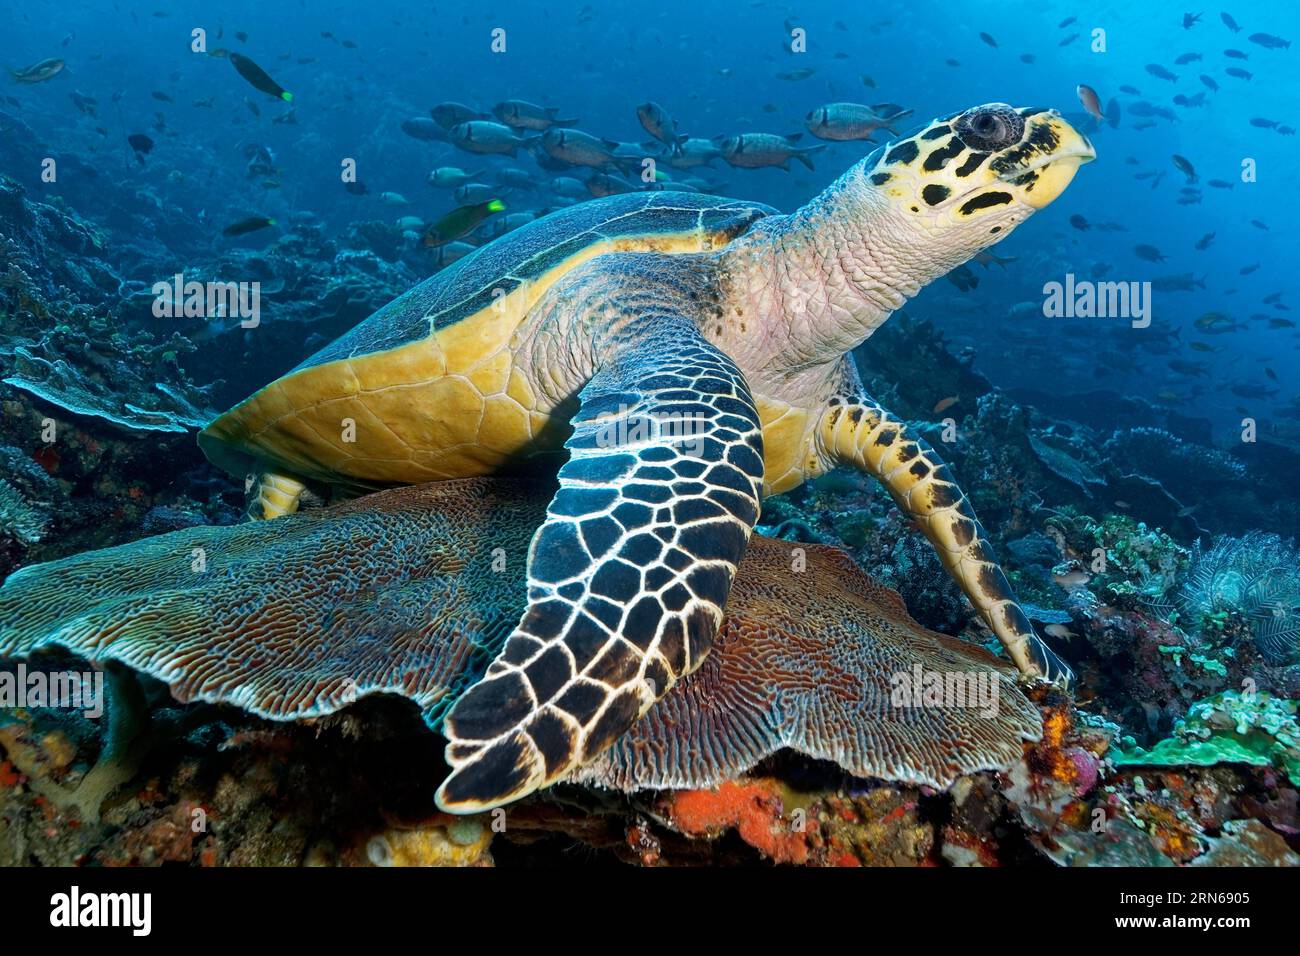 Hawksbill sea turtle (Eretmochelys imbricata) resting on Favia brain coral (Platygyra lamellina) in coral reef, shoal of pinecone soldierfish Stock Photo